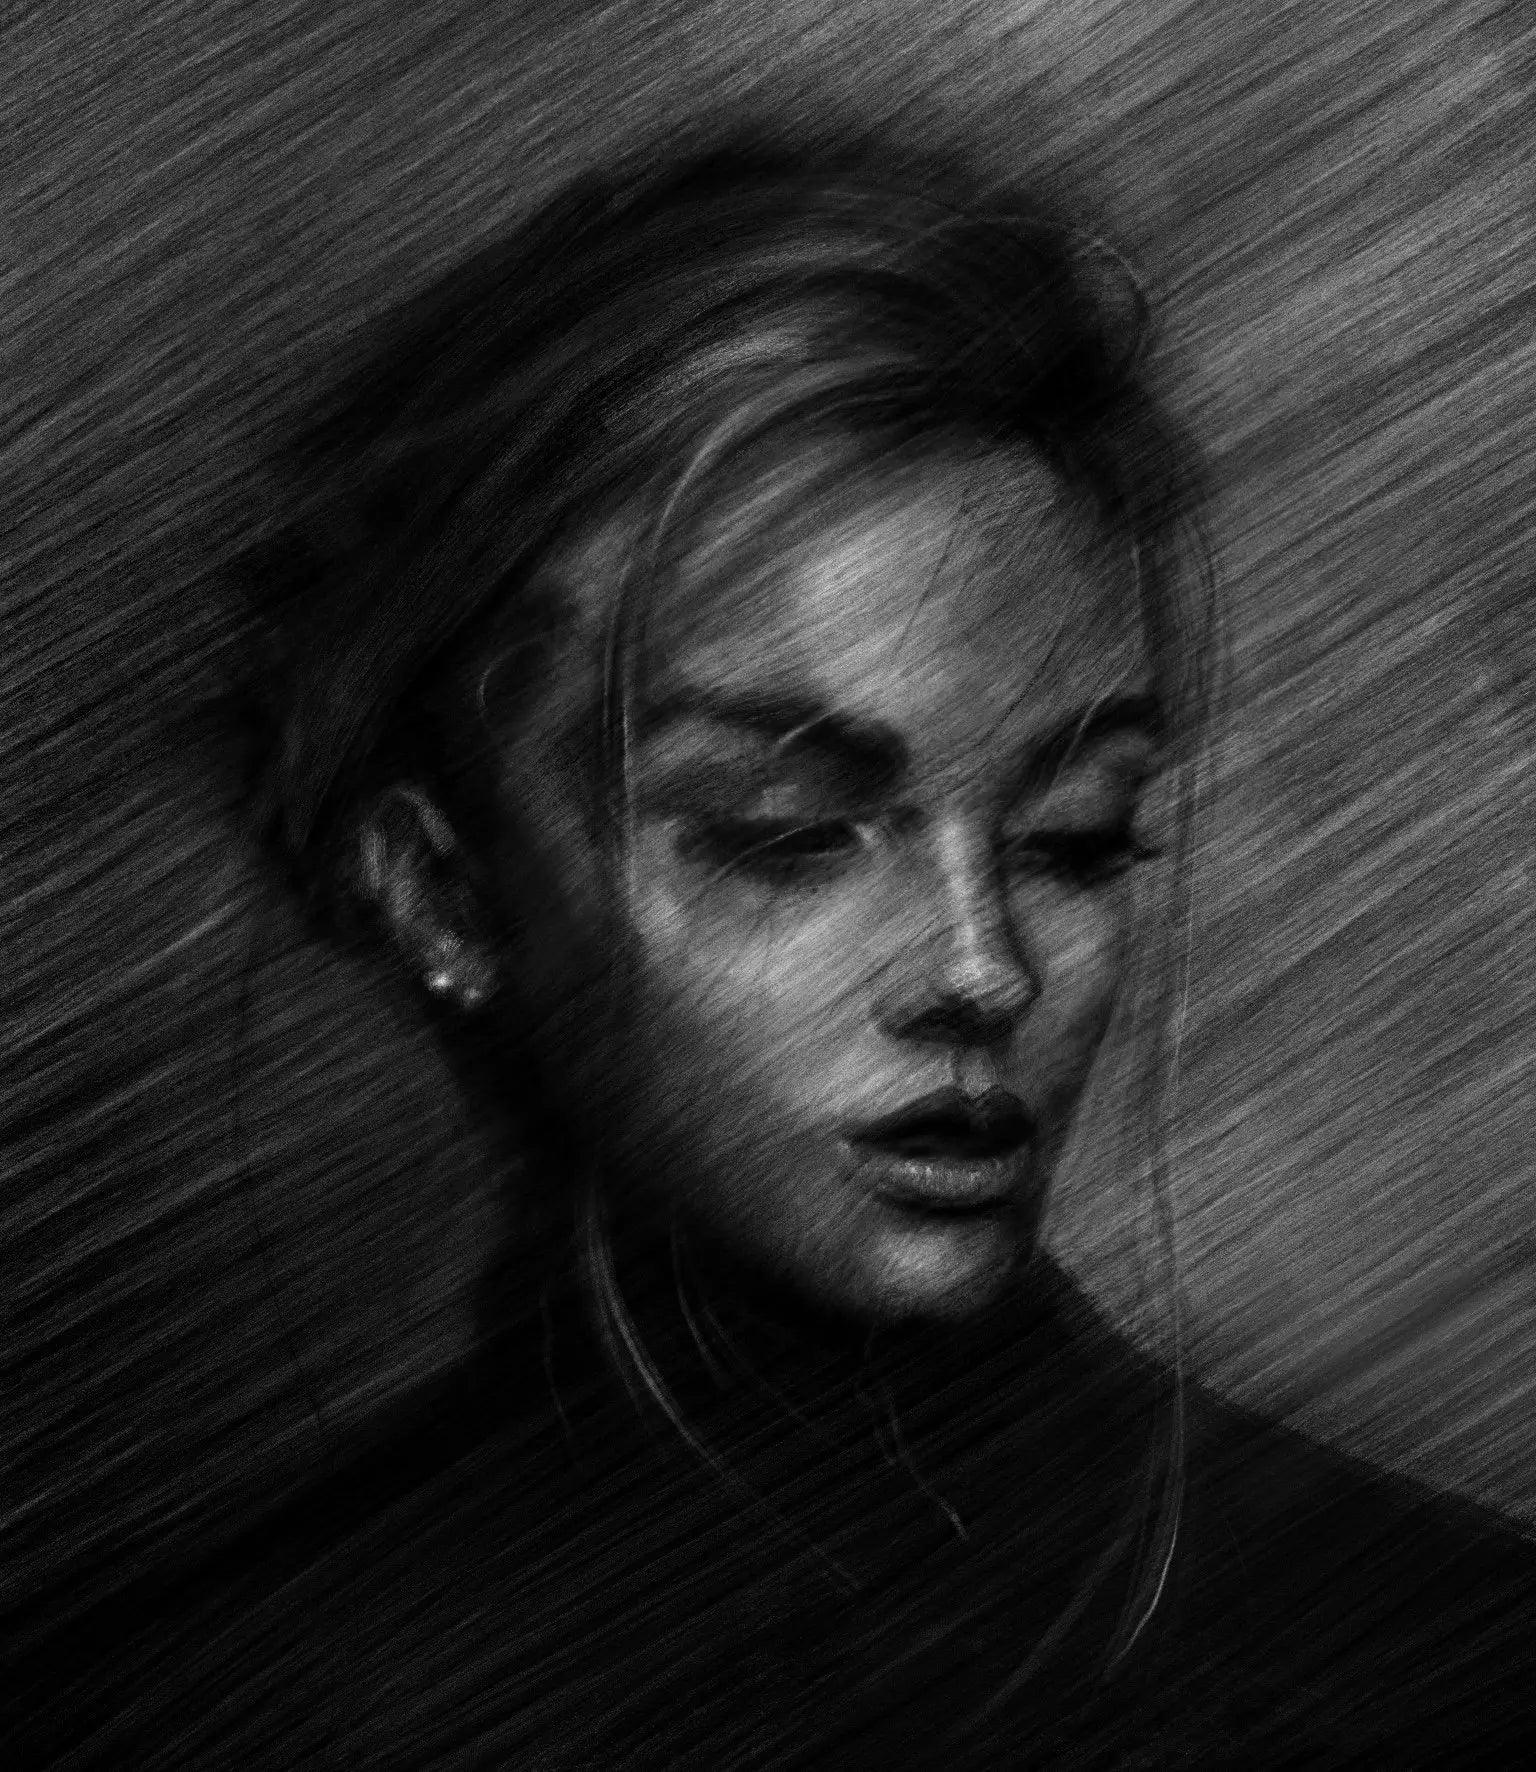 Charcoal portrait created in Procreate.